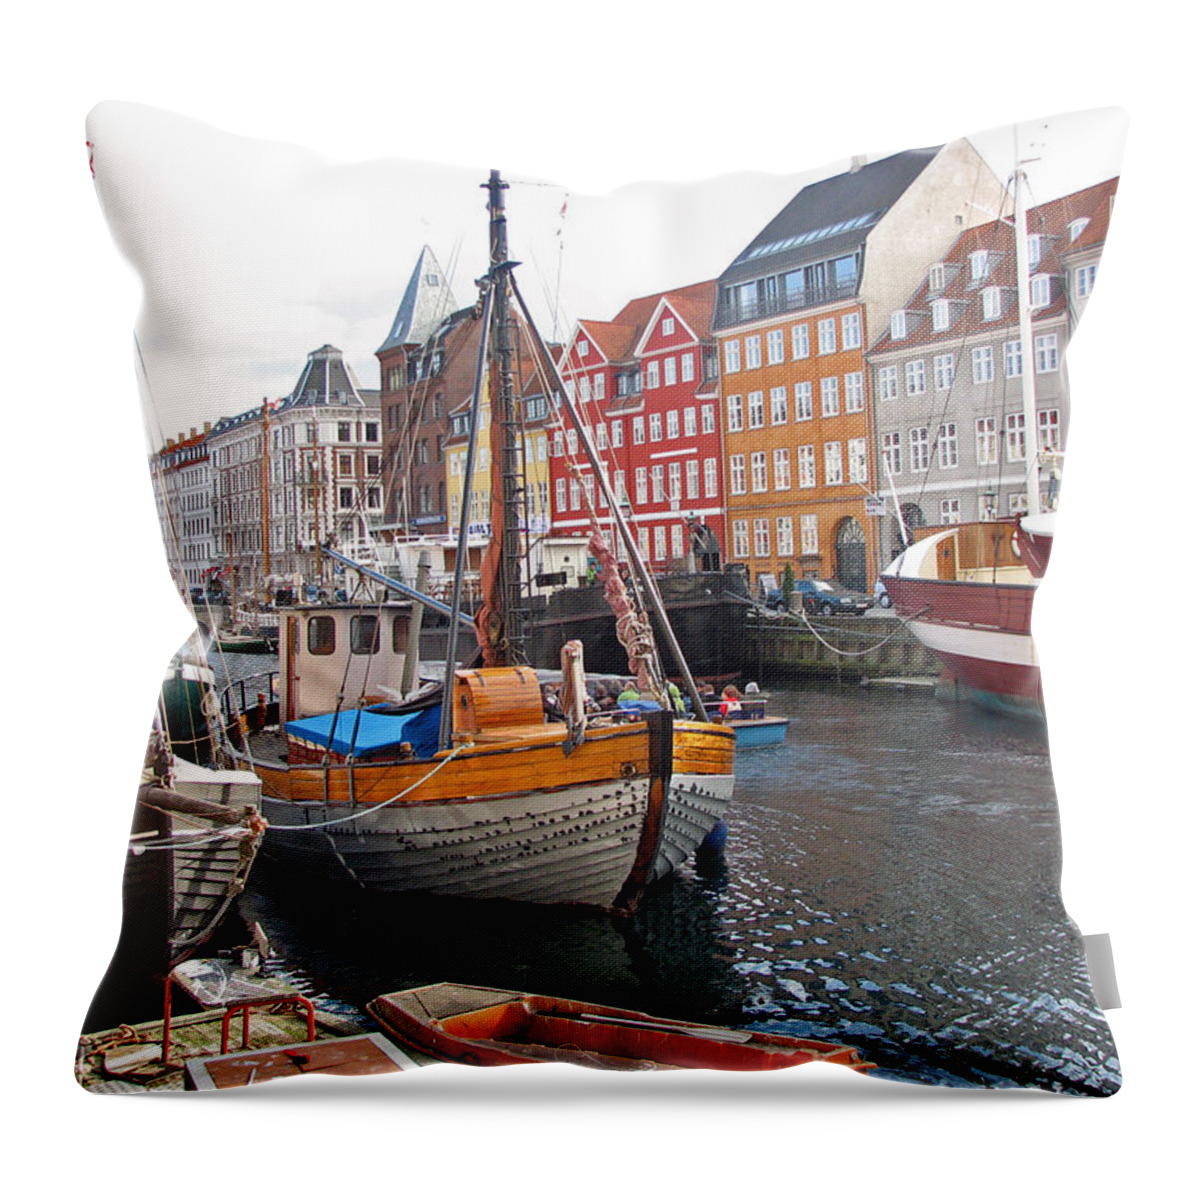 Nyhavn Throw Pillow featuring the photograph Nyhaven by Csilla Florida